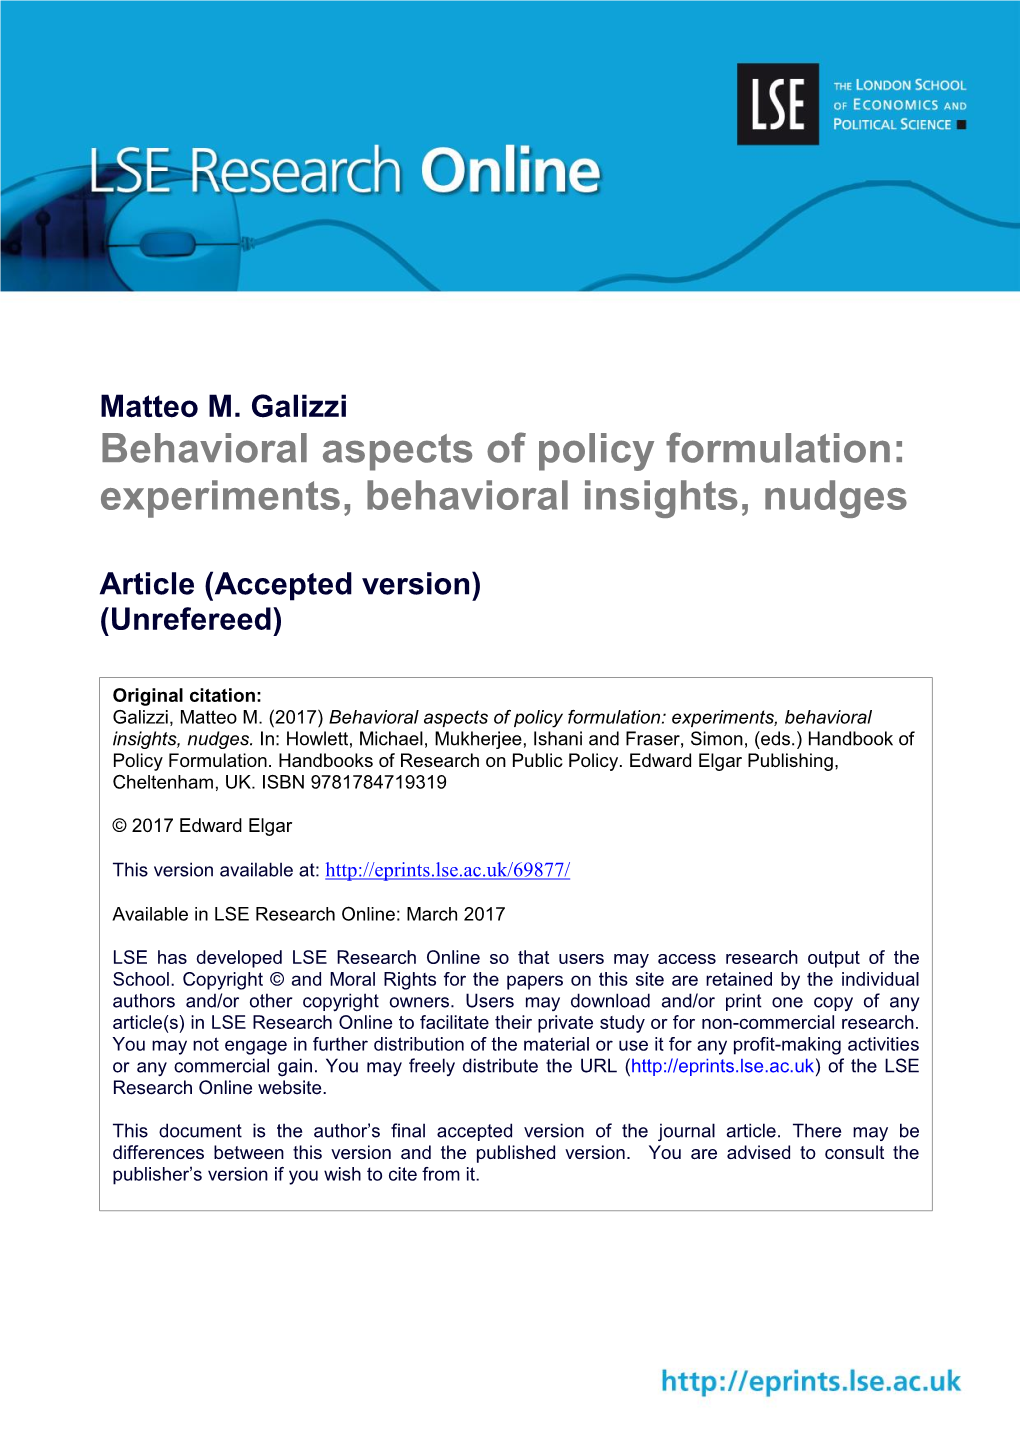 Behavioral Aspects of Policy Formulation: Experiments, Behavioral Insights, Nudges